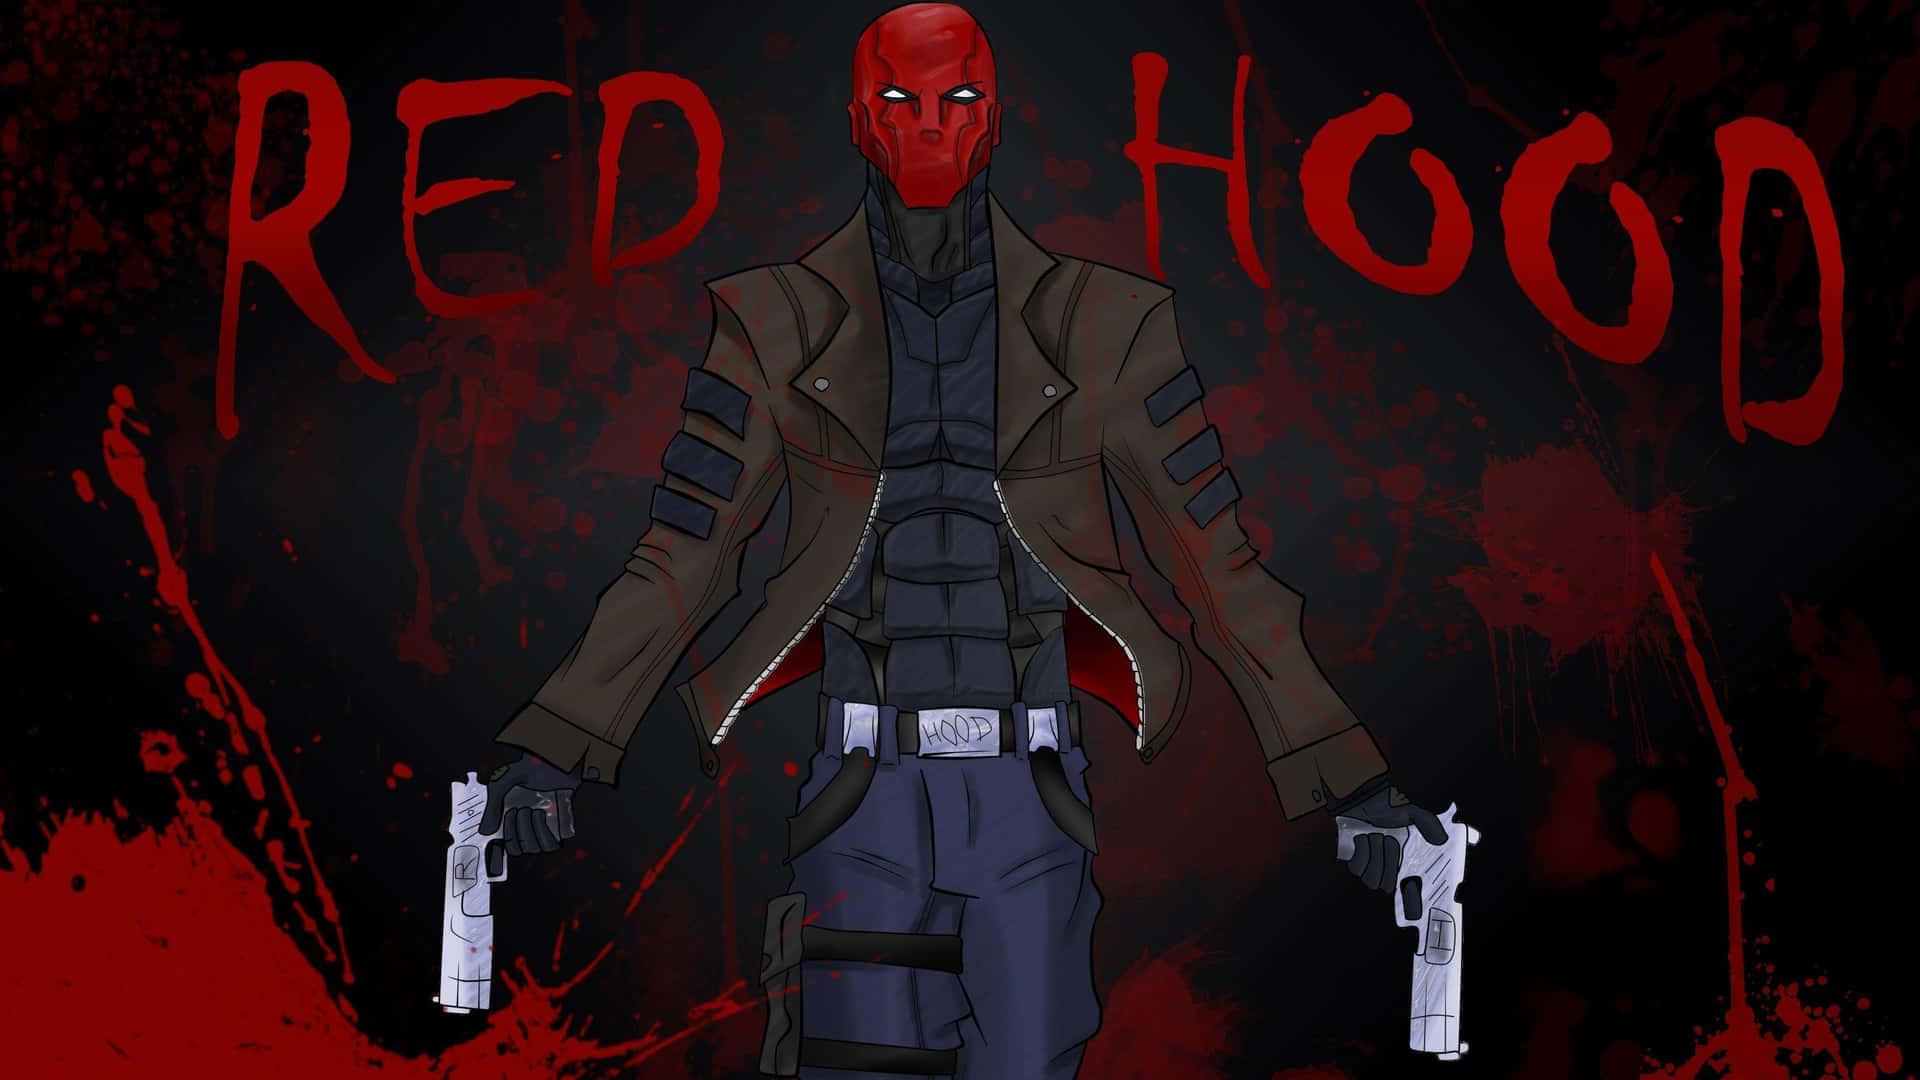 Robbin' the Town as Red Hood